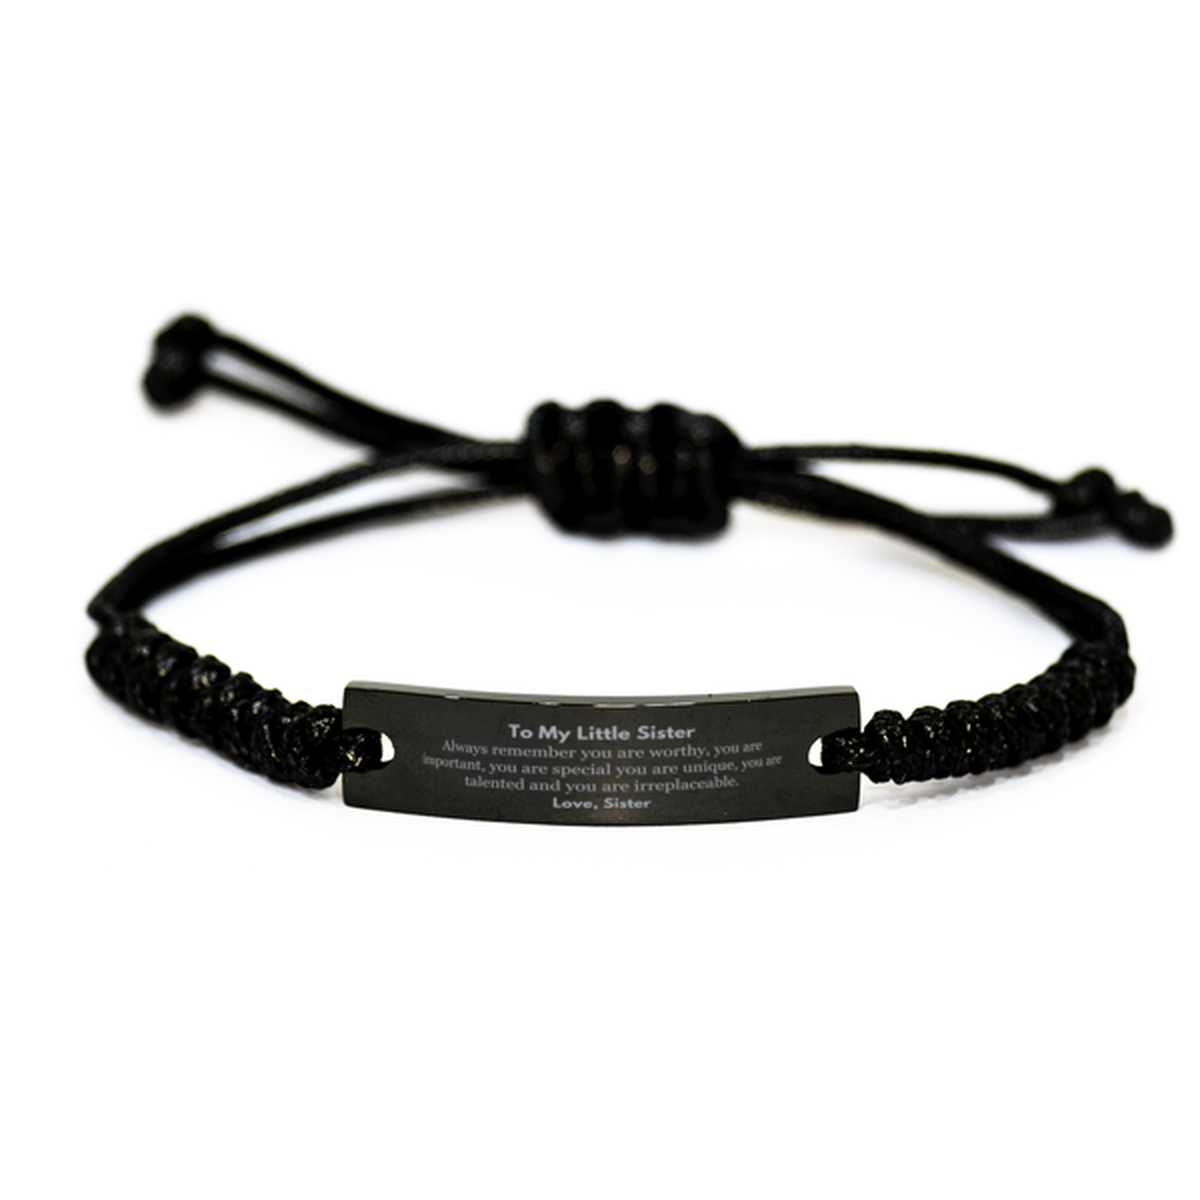 Little Sister Birthday Gifts from Sister, Inspirational Black Rope Bracelet for Little Sister Christmas Graduation Gifts for Little Sister Always remember you are worthy, you are important. Love, Sister